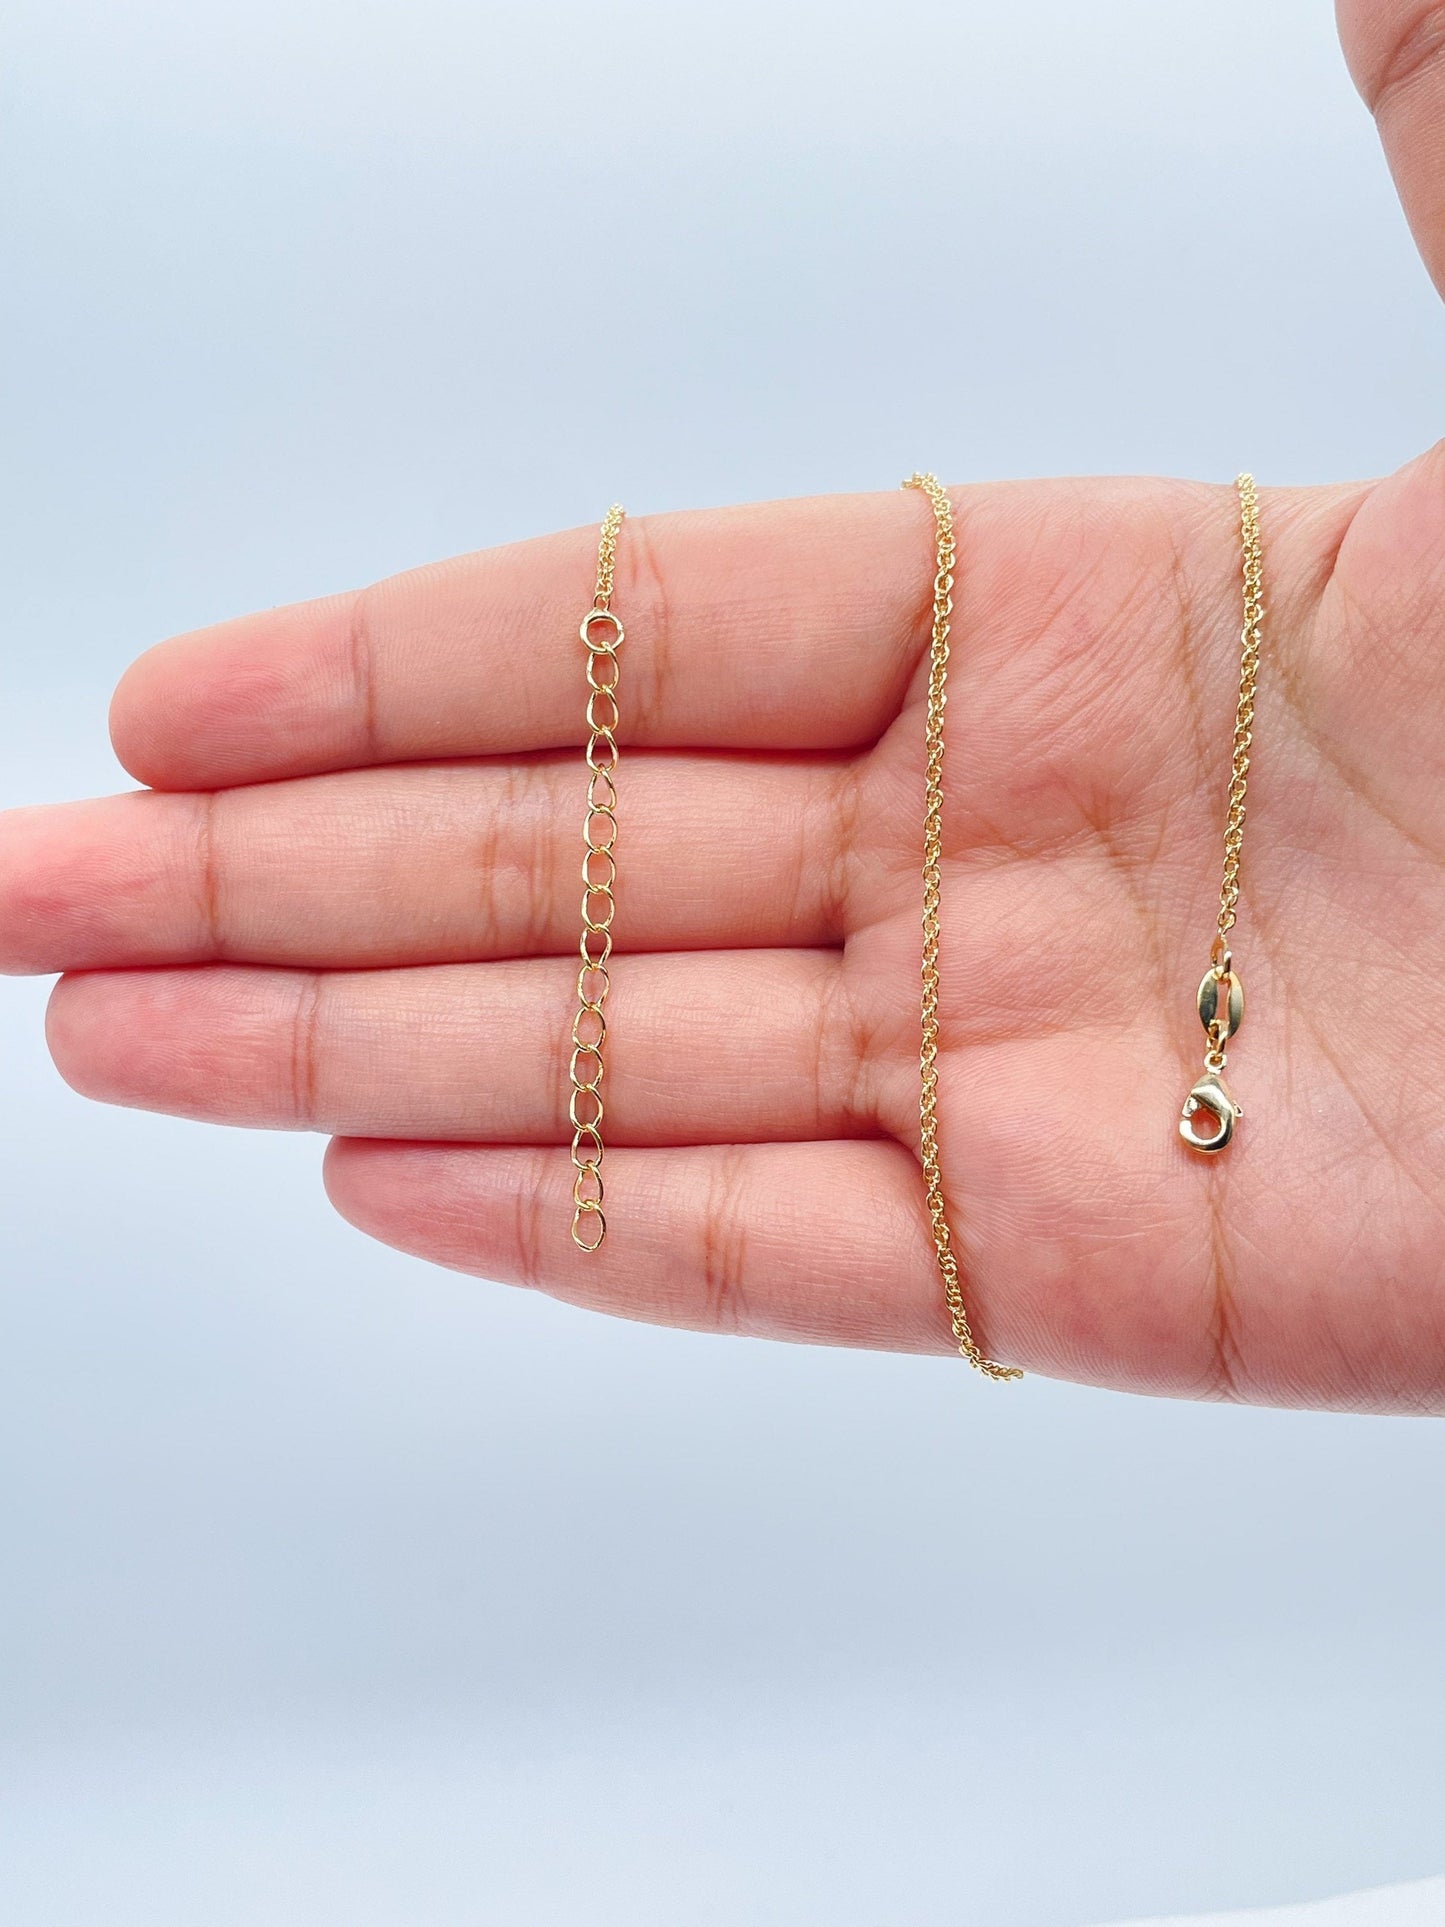 18k Gold Layered 1mm Wheat Chain Available In Sizes 16” , 18”, 20”, 22” & 24” For